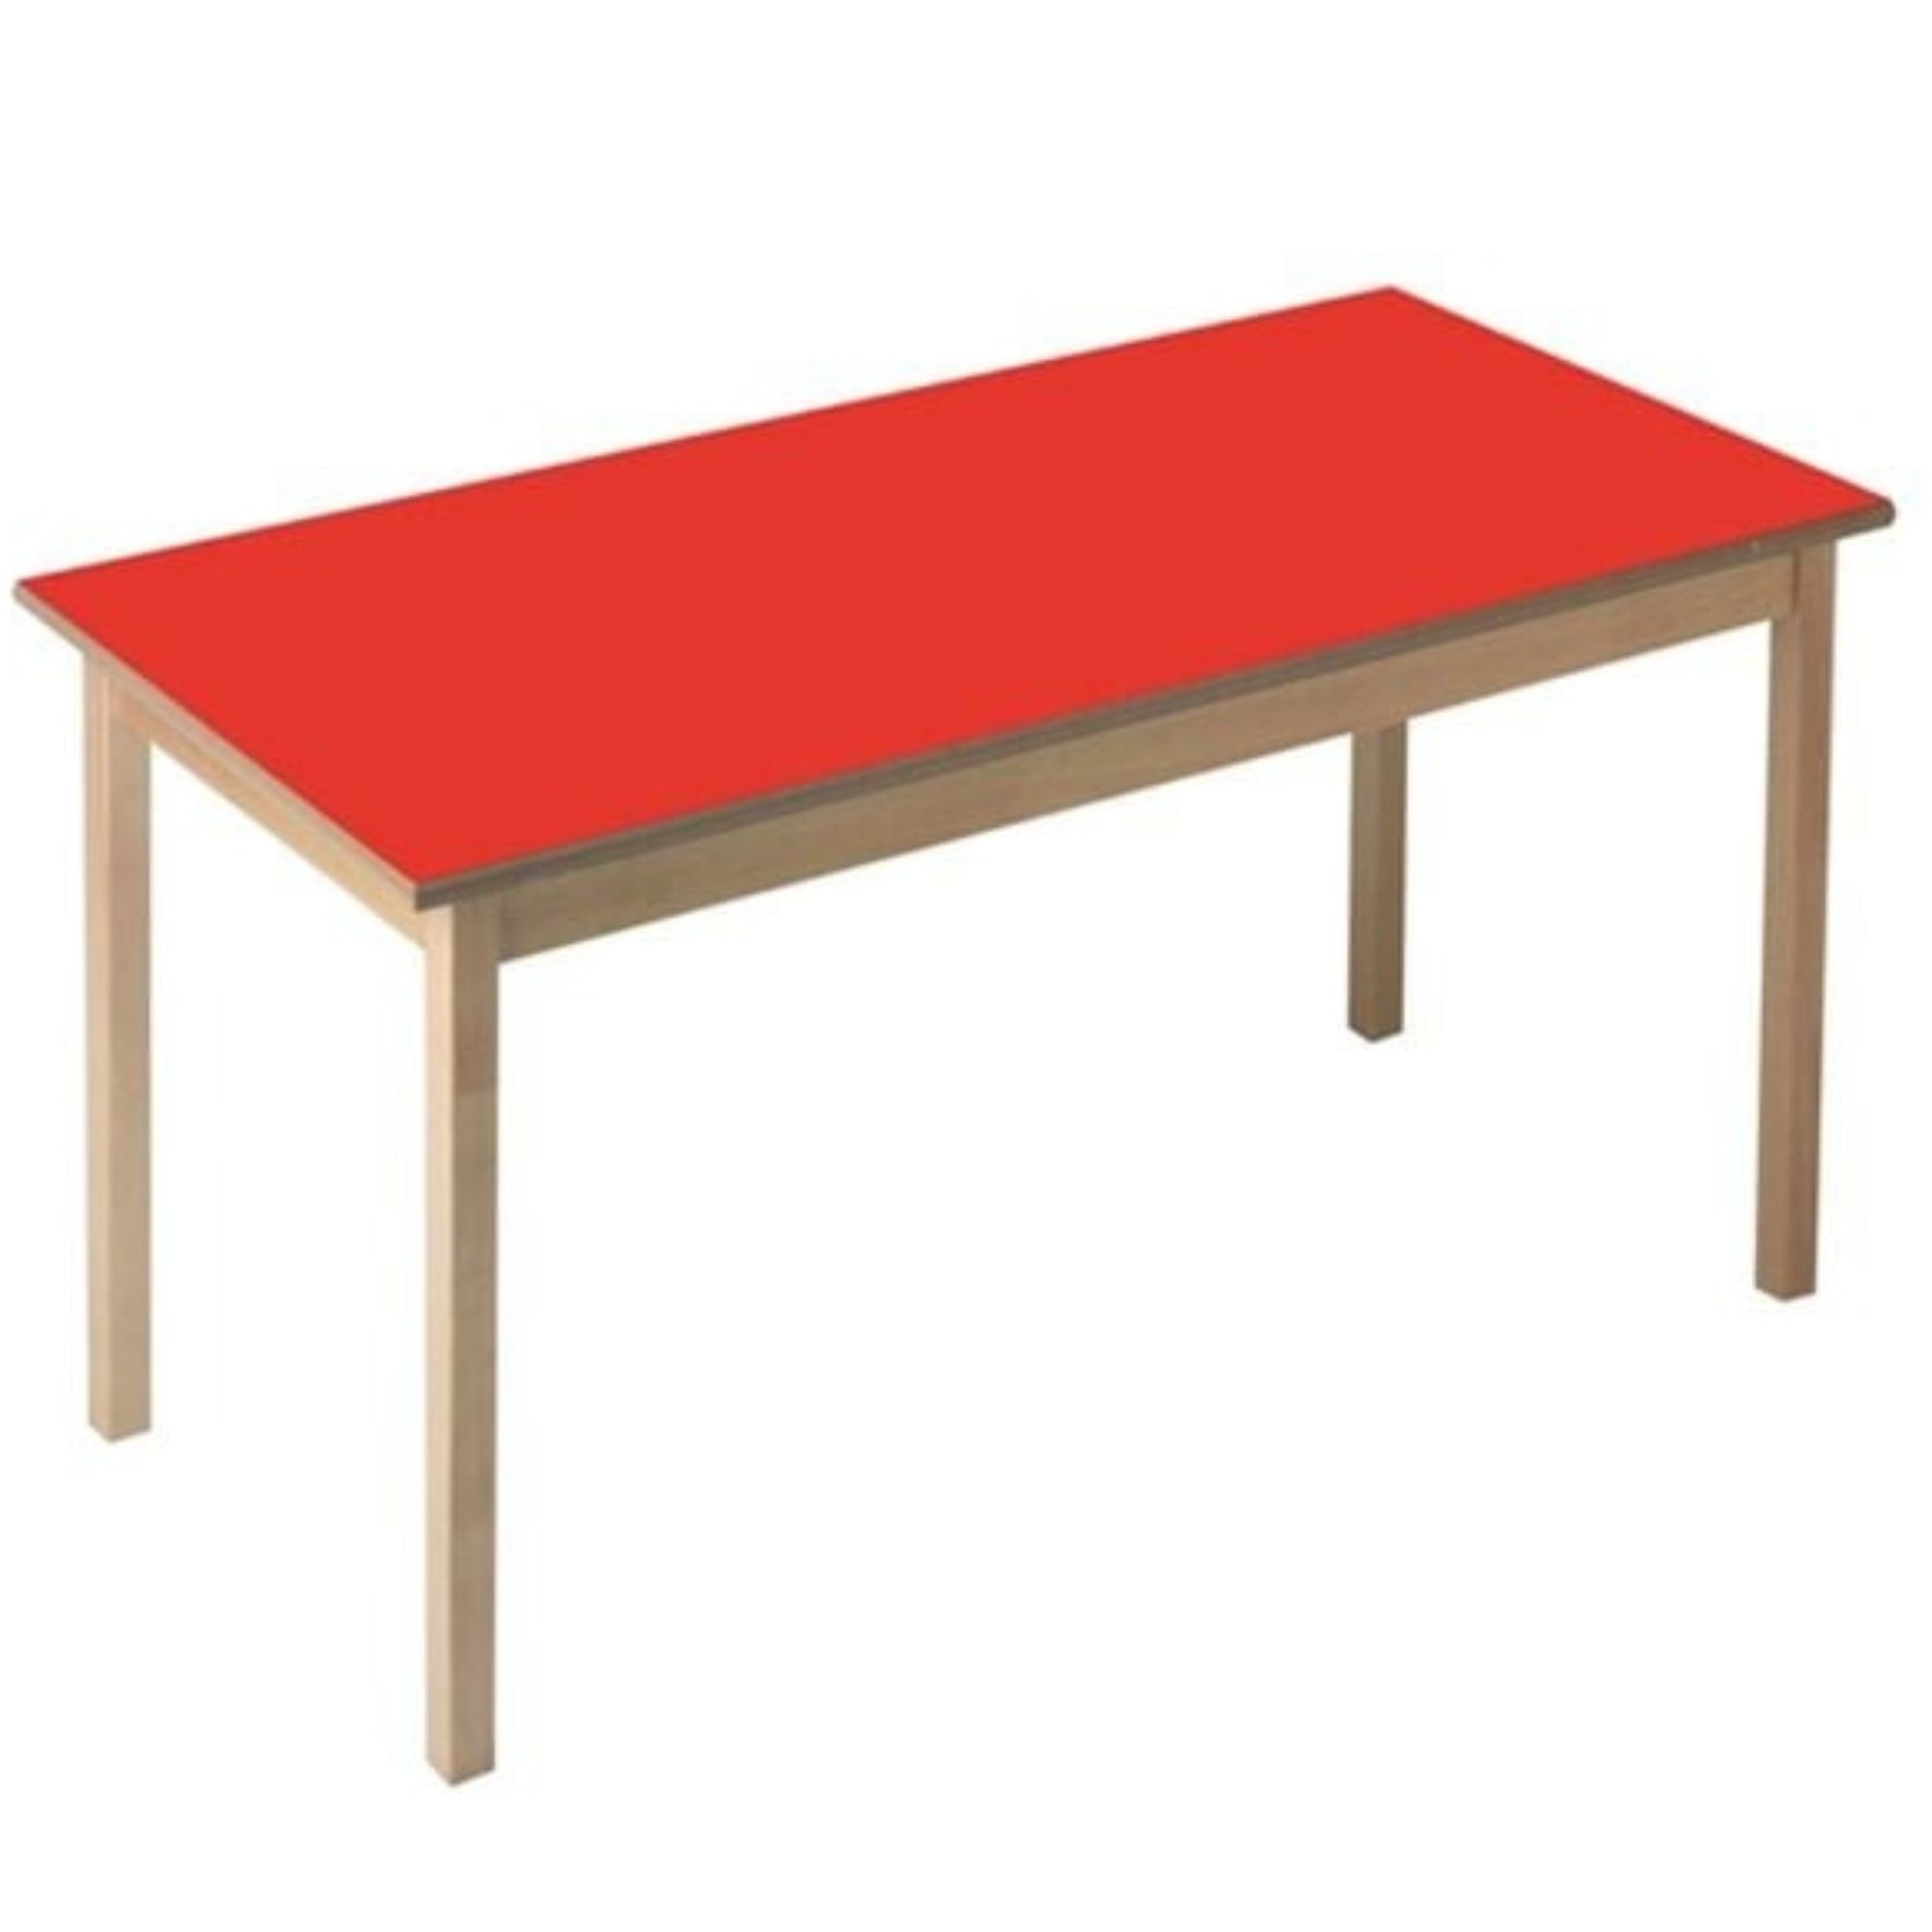 Natural Wooden Rectangular Classroom Table, Introducing the Natural Wooden Rectangular Classroom Table - the perfect choice for early years environments. Designed to provide a comfortable and sturdy workspace for students, this table is perfect for a range of activities, including work, lunch, and play. Crafted with care in the UK, this table features a smooth table top with a solid wood underframe, providing an ideal surface for writing, drawing, and more. The round edges of the table add an extra layer of